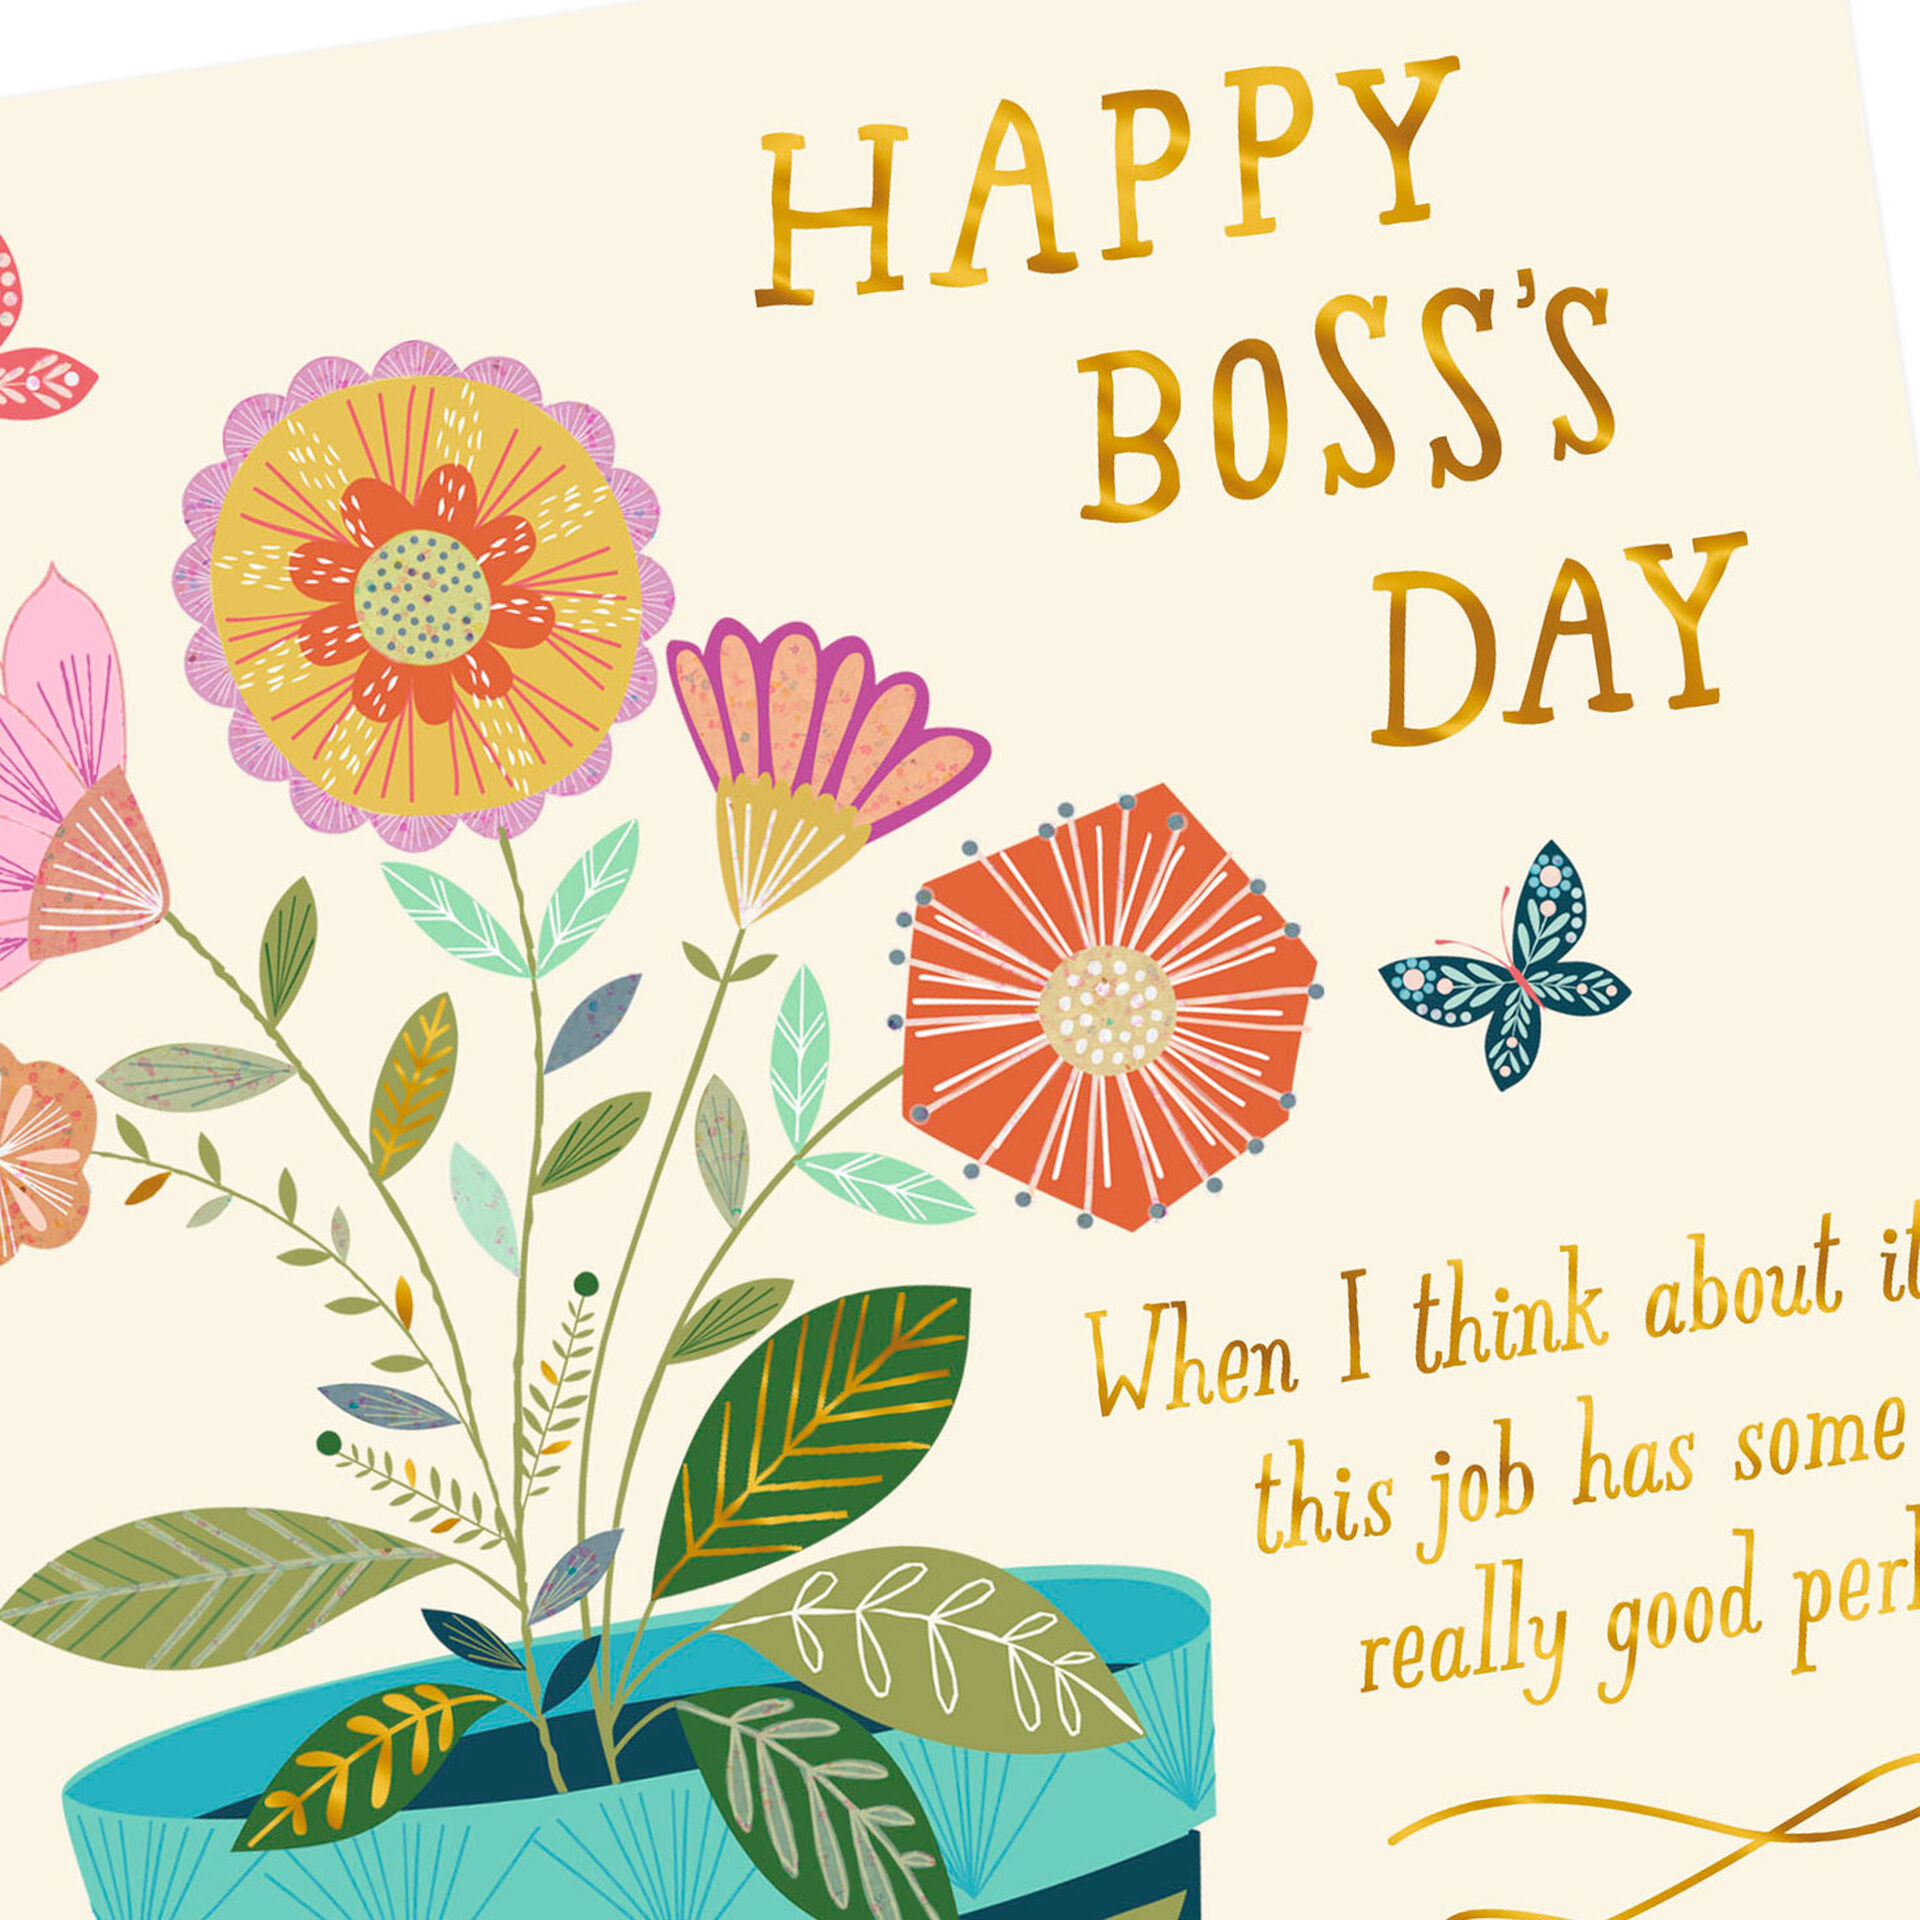 You're a Really Nice Boss Boss's Day Card - Greeting Cards - Hallmark